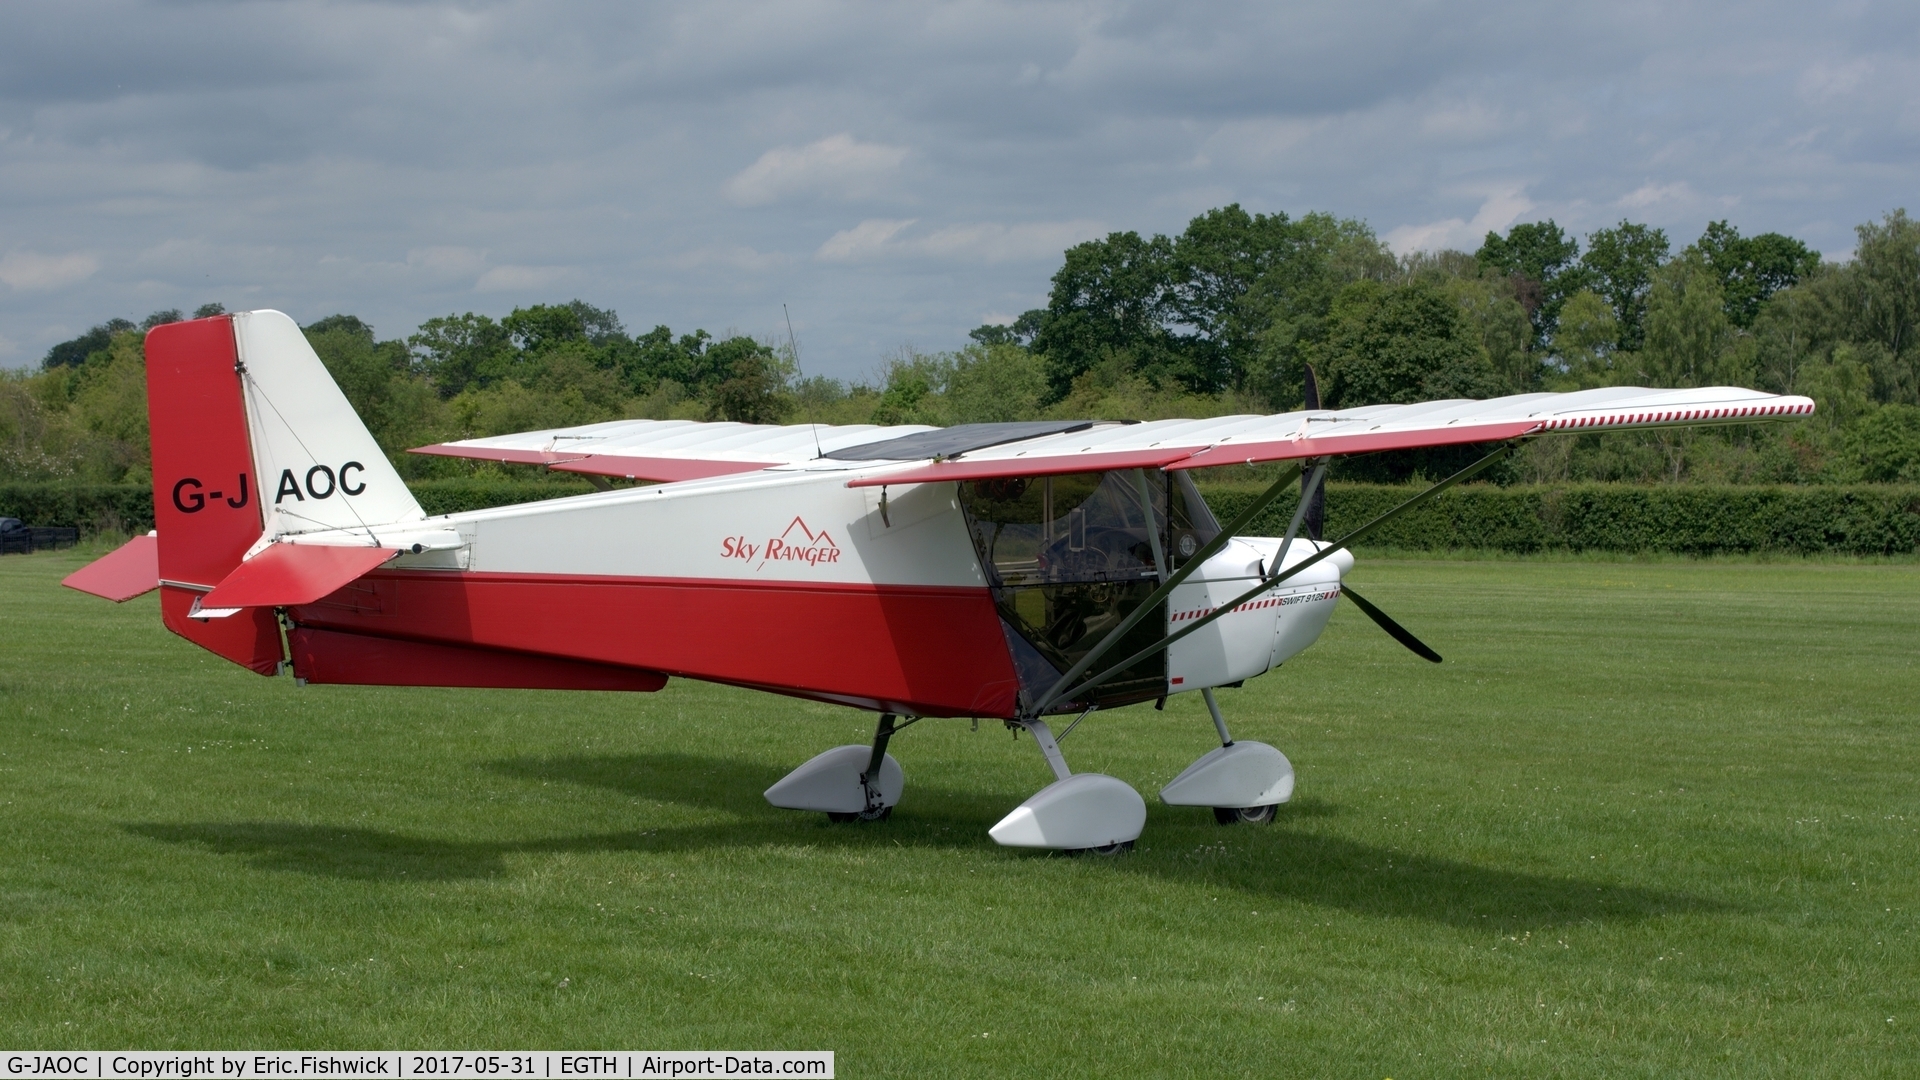 G-JAOC, 2009 Best Off Skyranger Swift 912S(1) C/N BMAA/HB/589, 2. G-JAOC visiting the Shuttleworth Collection - May, 2017.